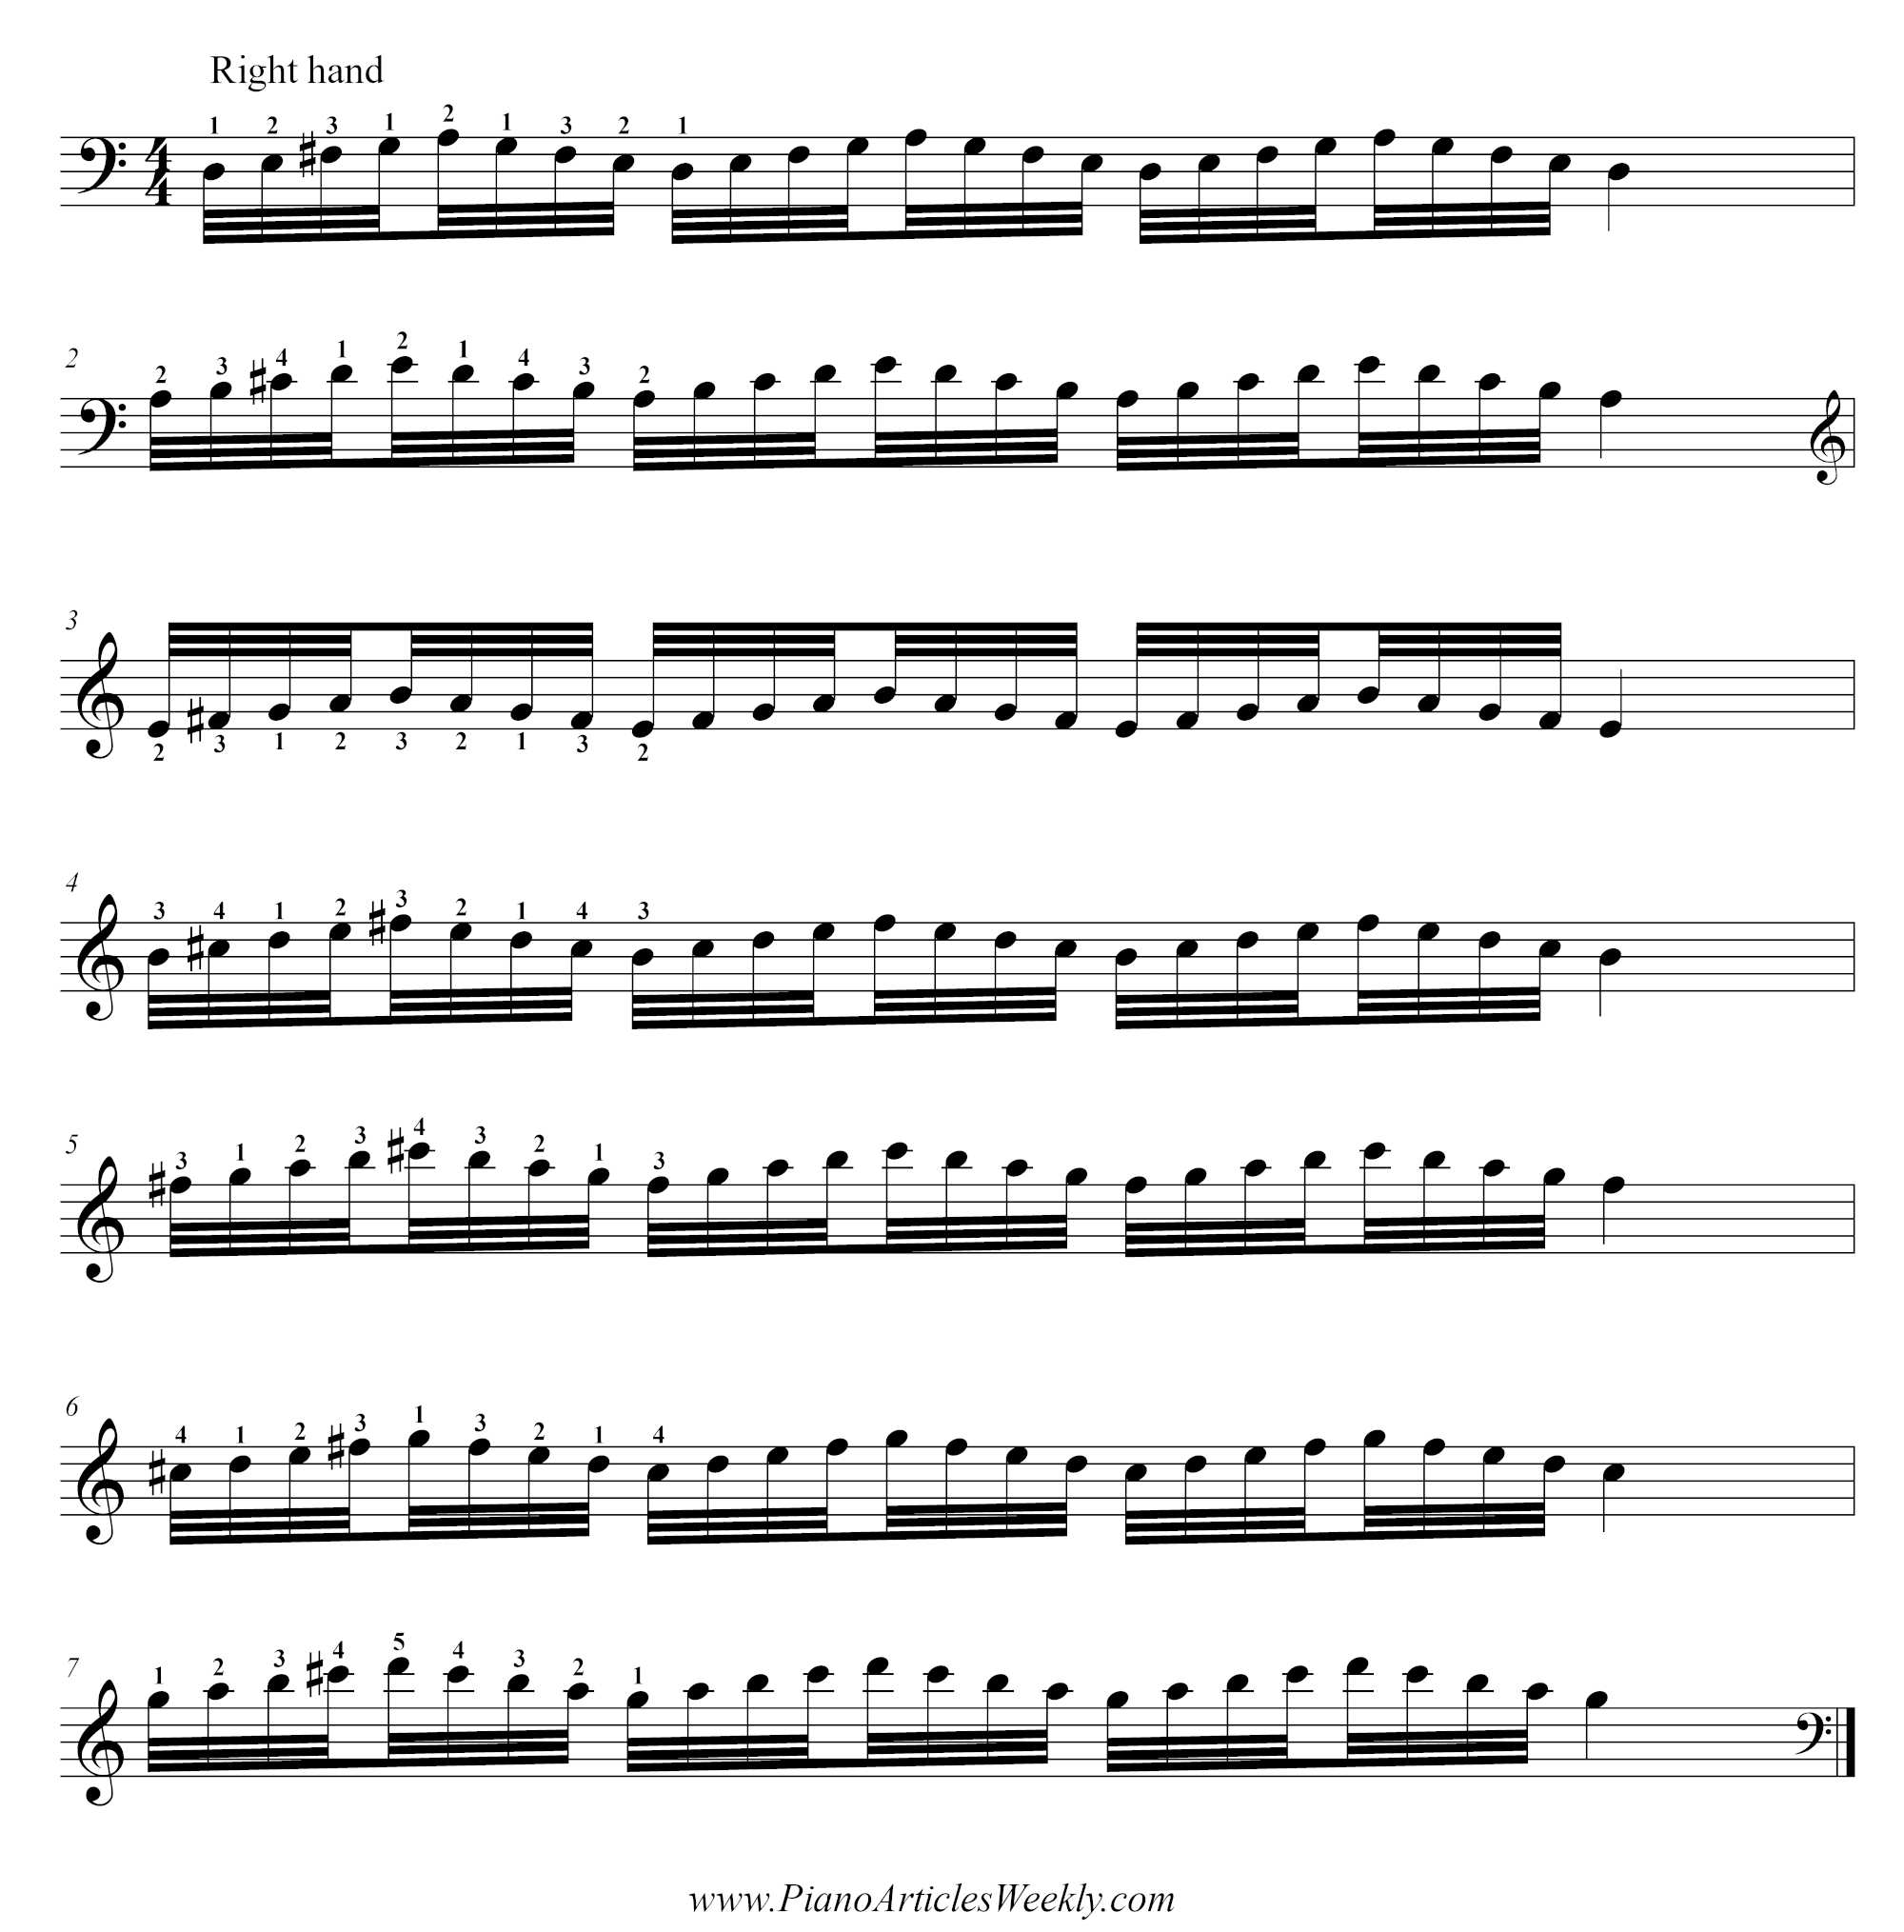 D major piano scale - advanced exercise in groups of four - right hand